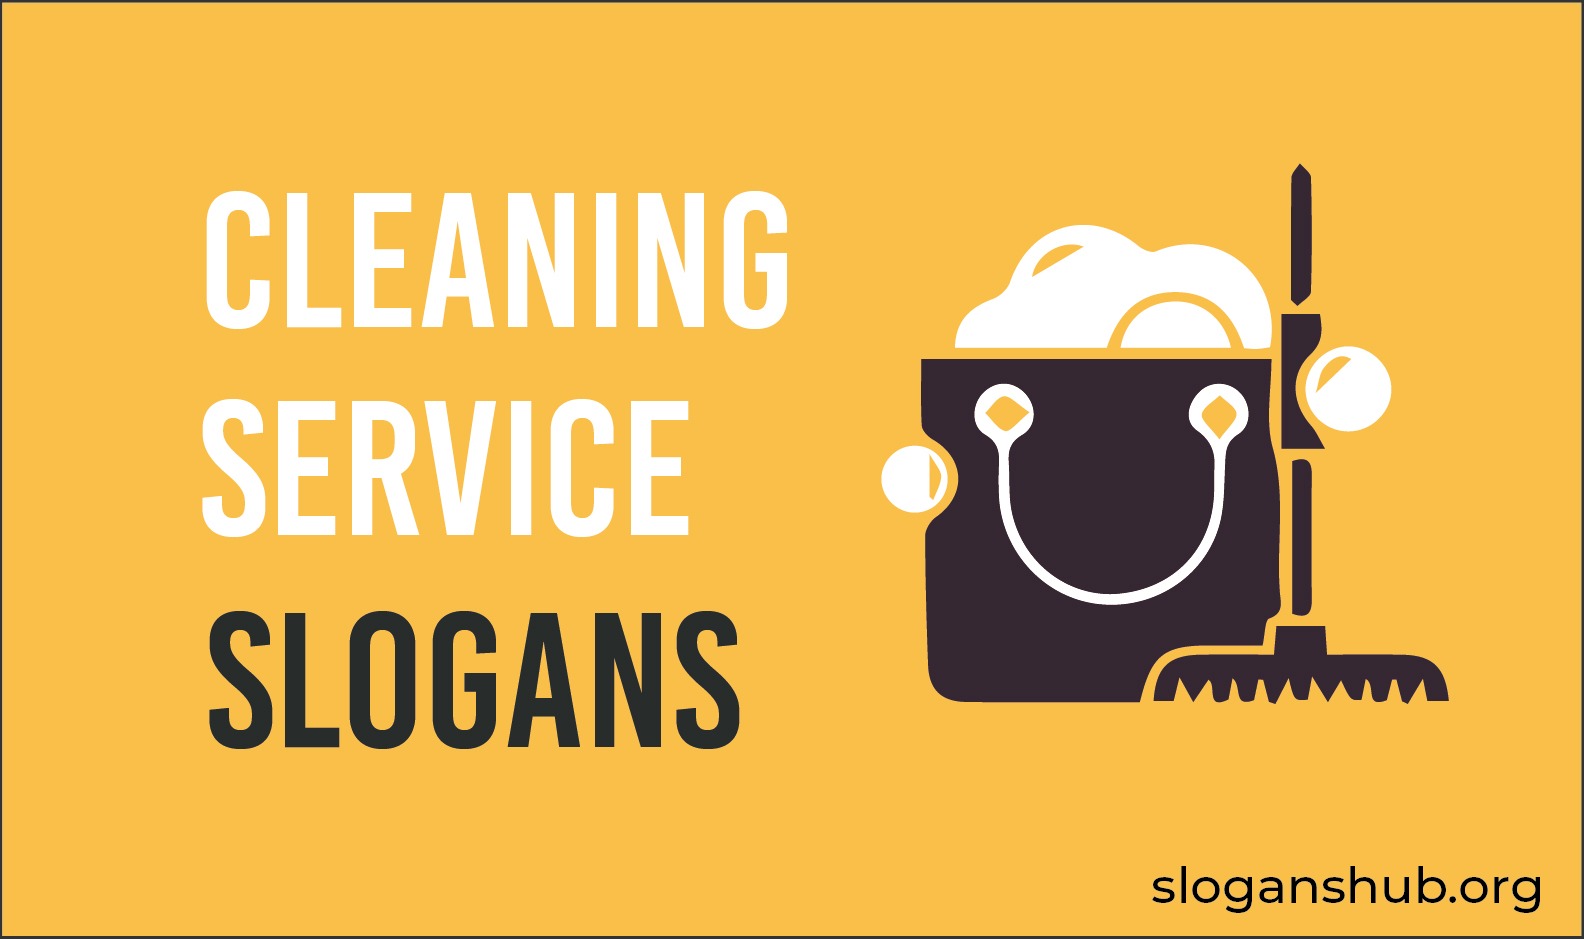 45 Catchy Cleaning Service Slogans and Taglines